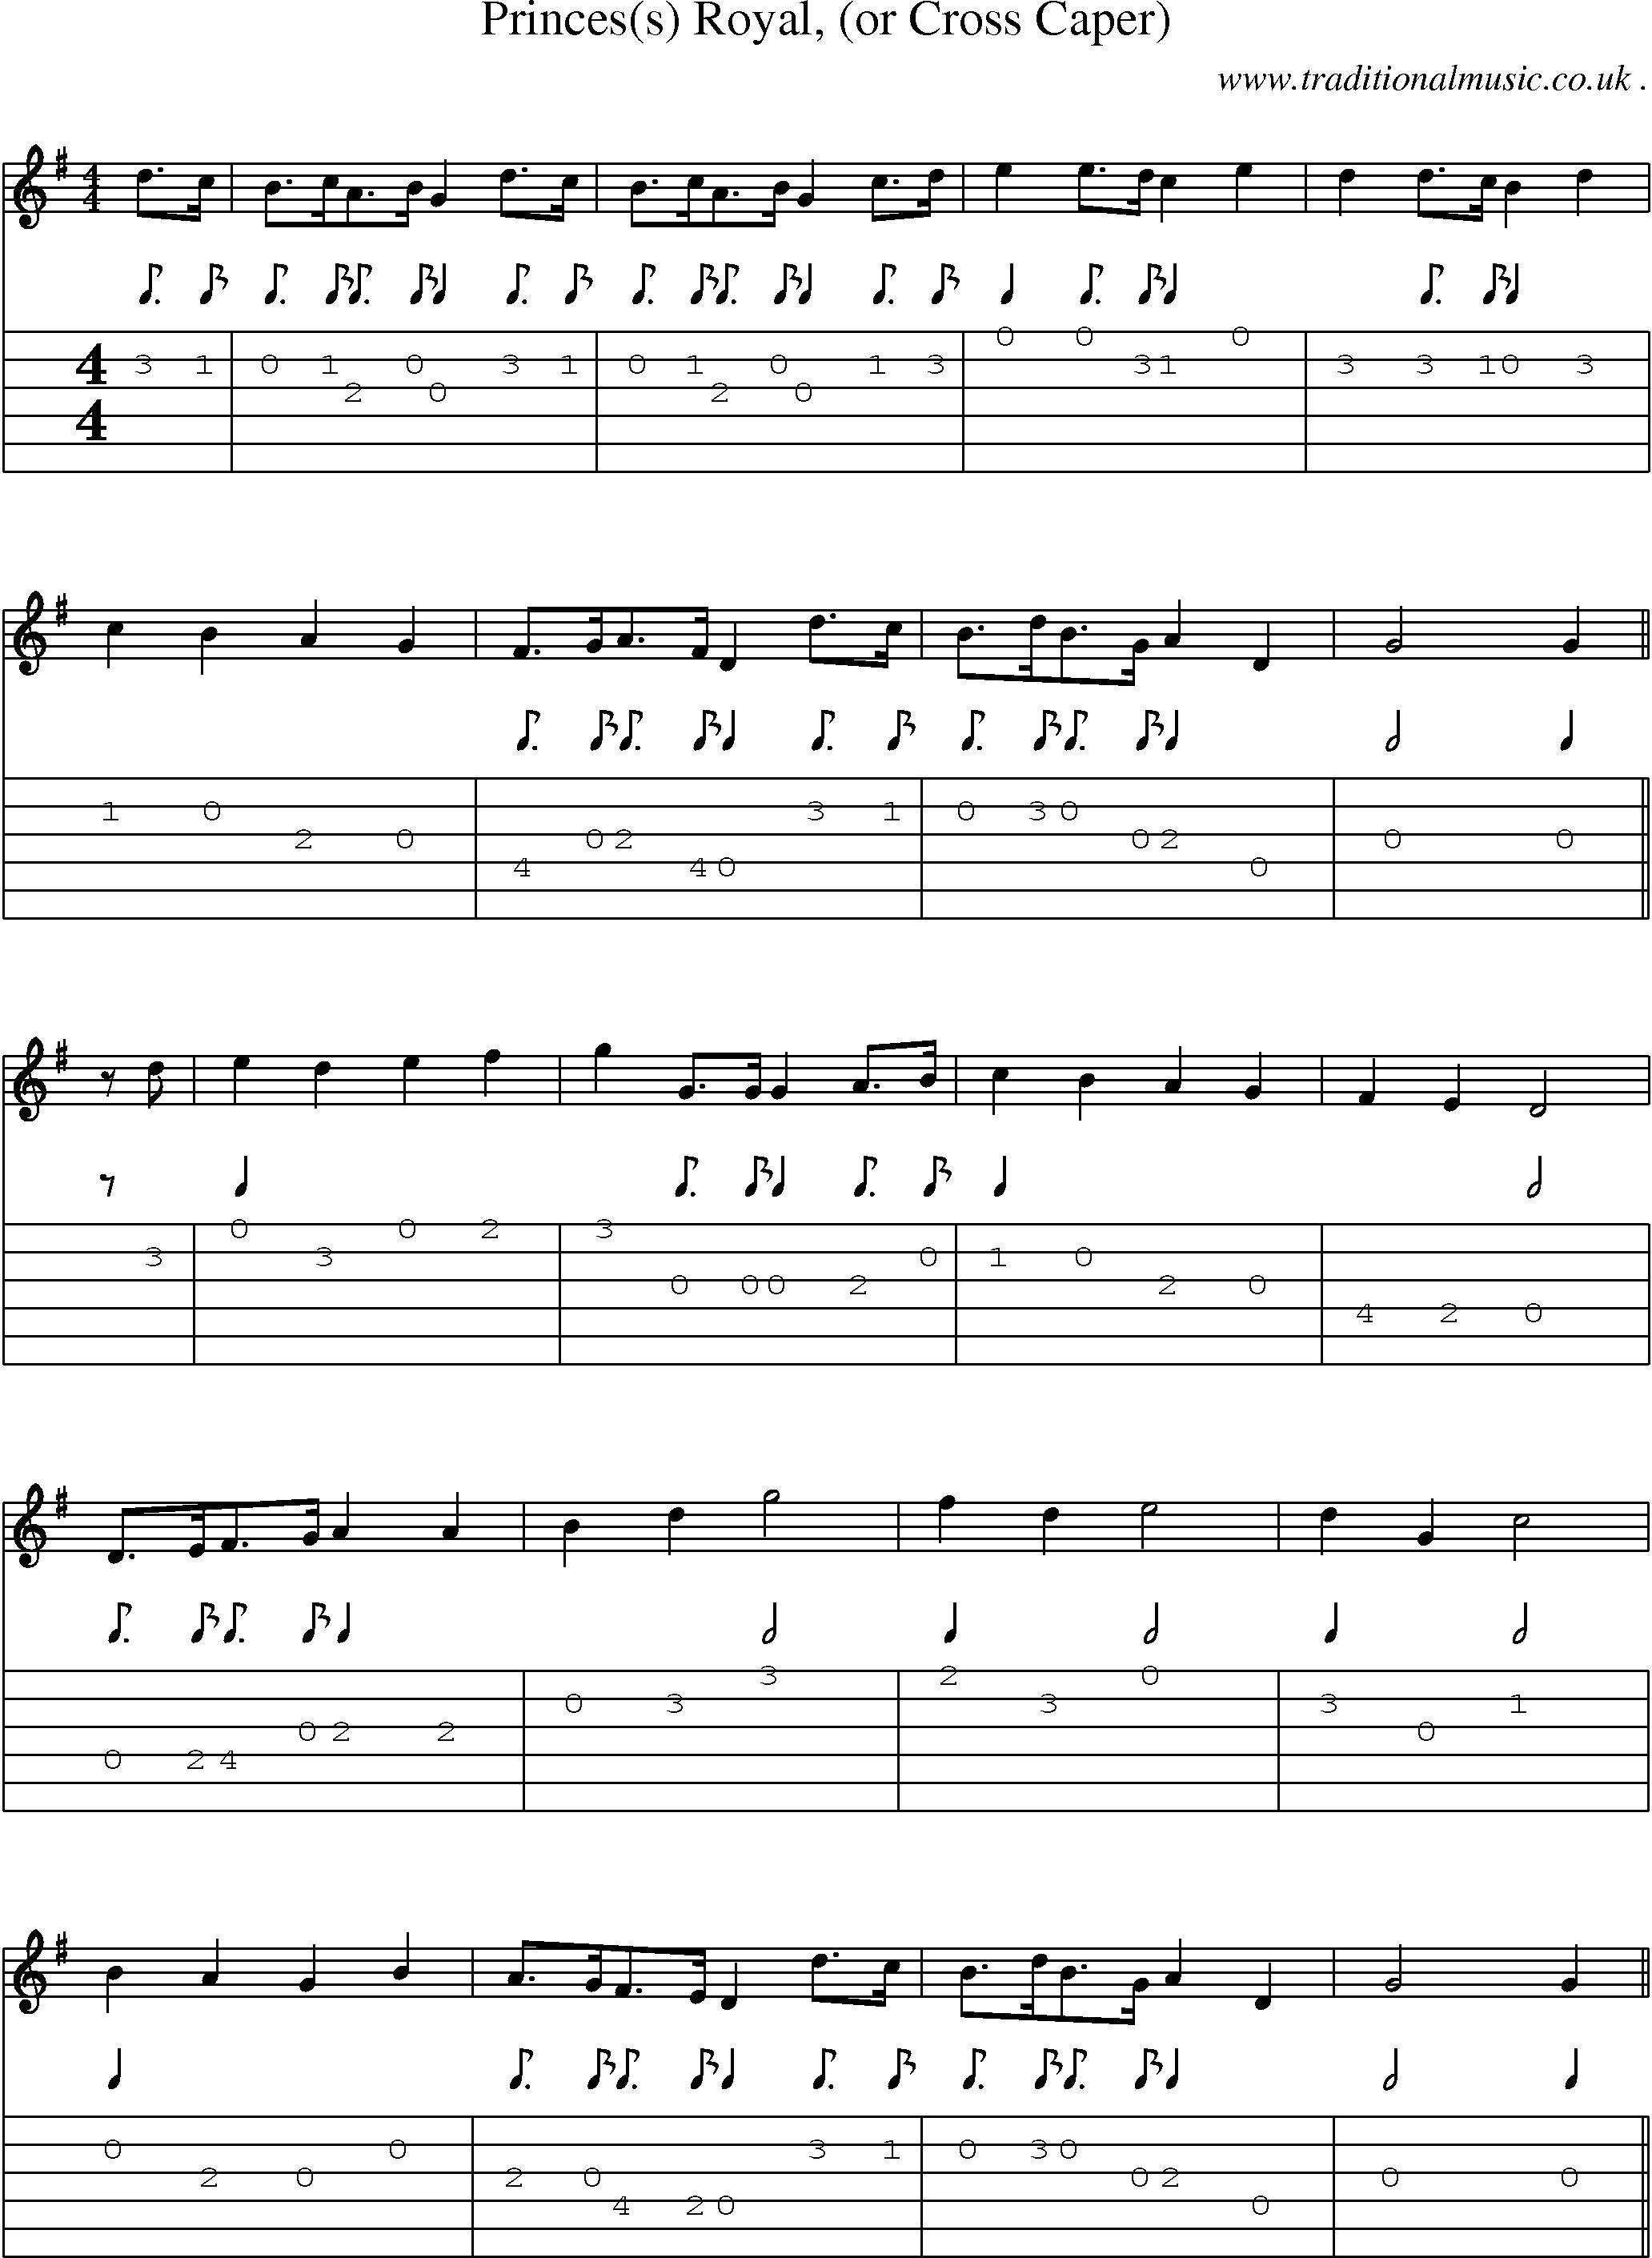 Sheet-Music and Guitar Tabs for Princes(s) Royal (or Cross Caper)